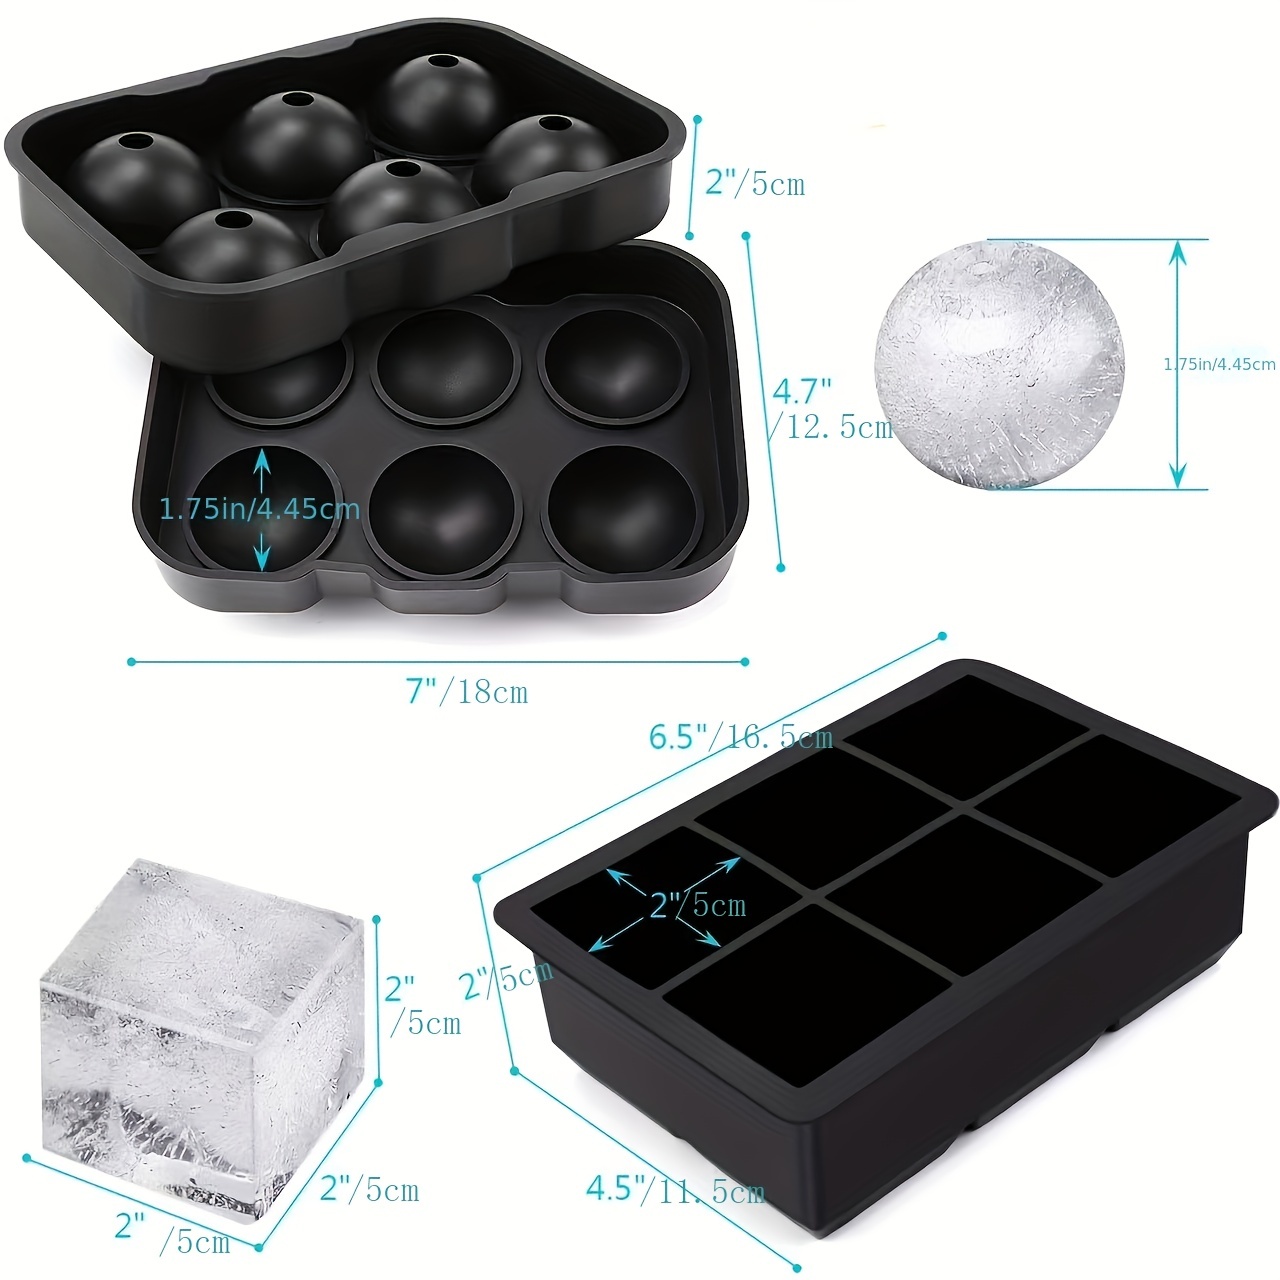 5CM Big Ice Cube Maker Trays Silicone Square Ice Mold Mould for